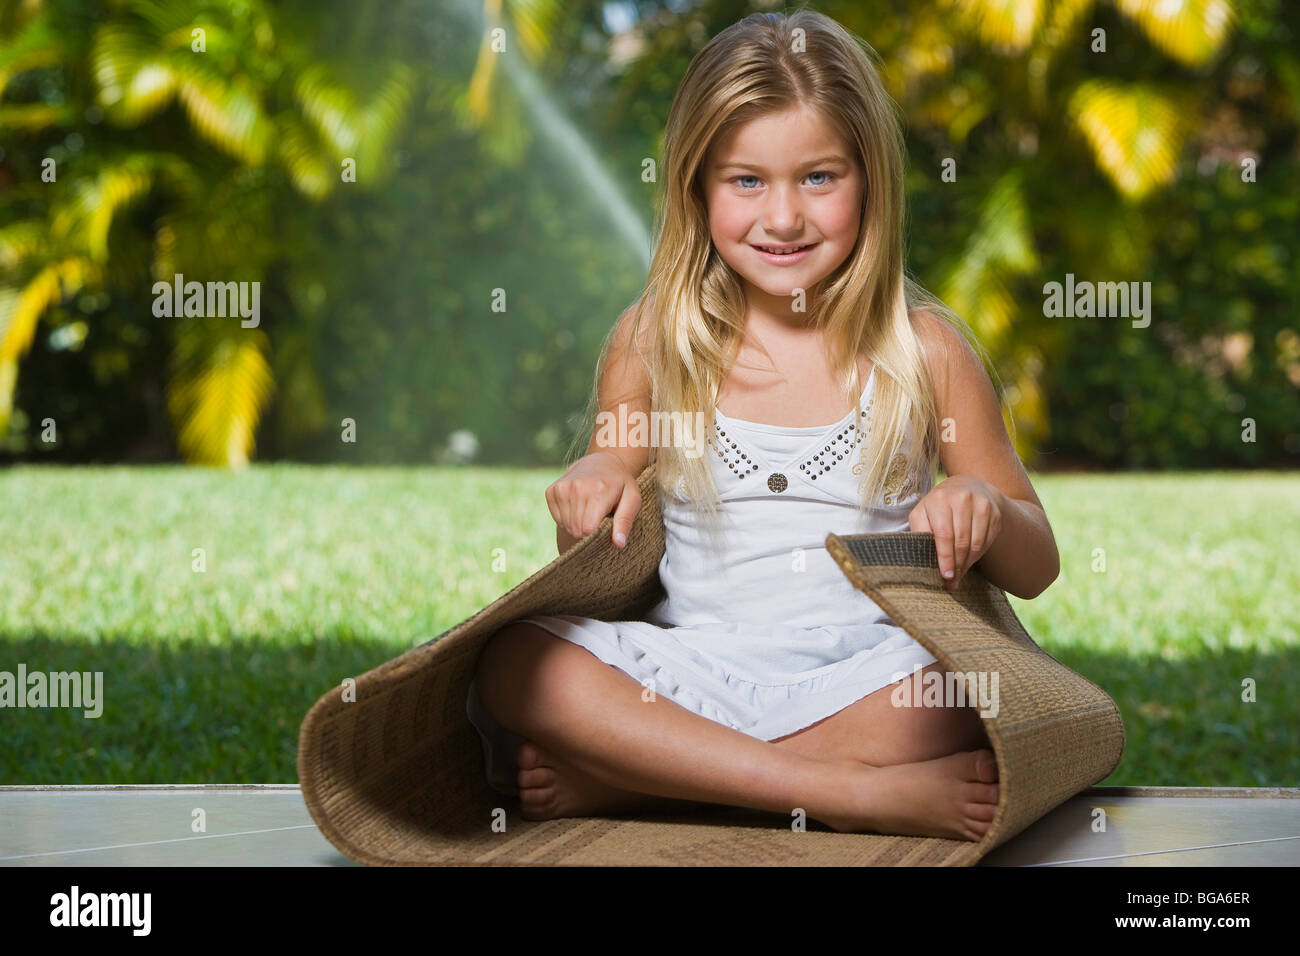 Blond girl sitting down on rug, smiling, portrait Stock Photo